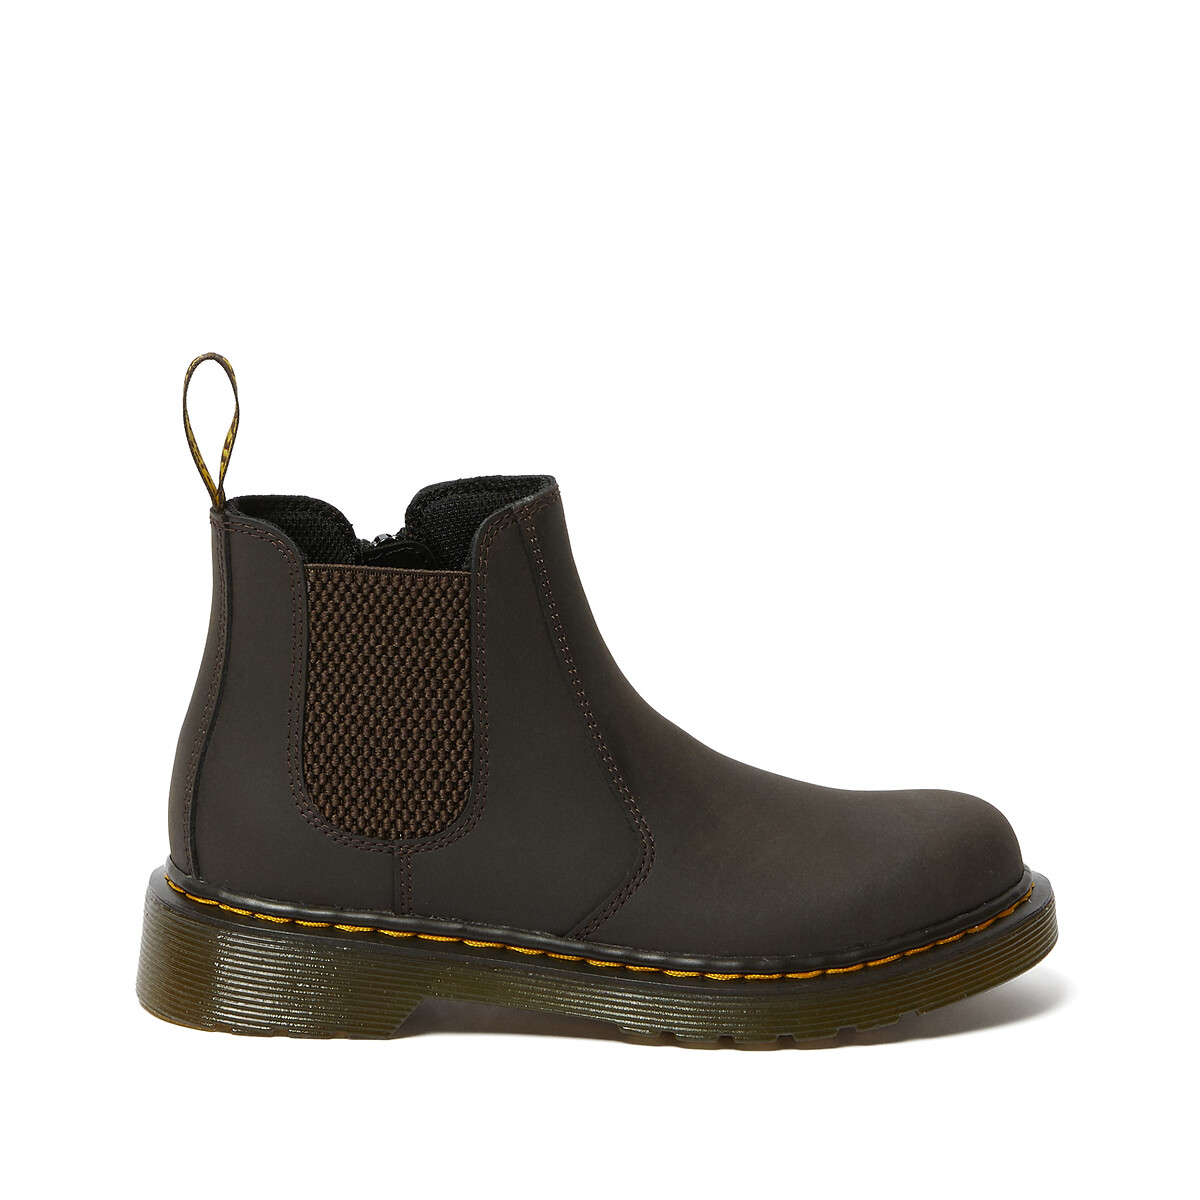 Image of Kids' 2976 Chelsea Boots in Wildhorse Lamper Leather